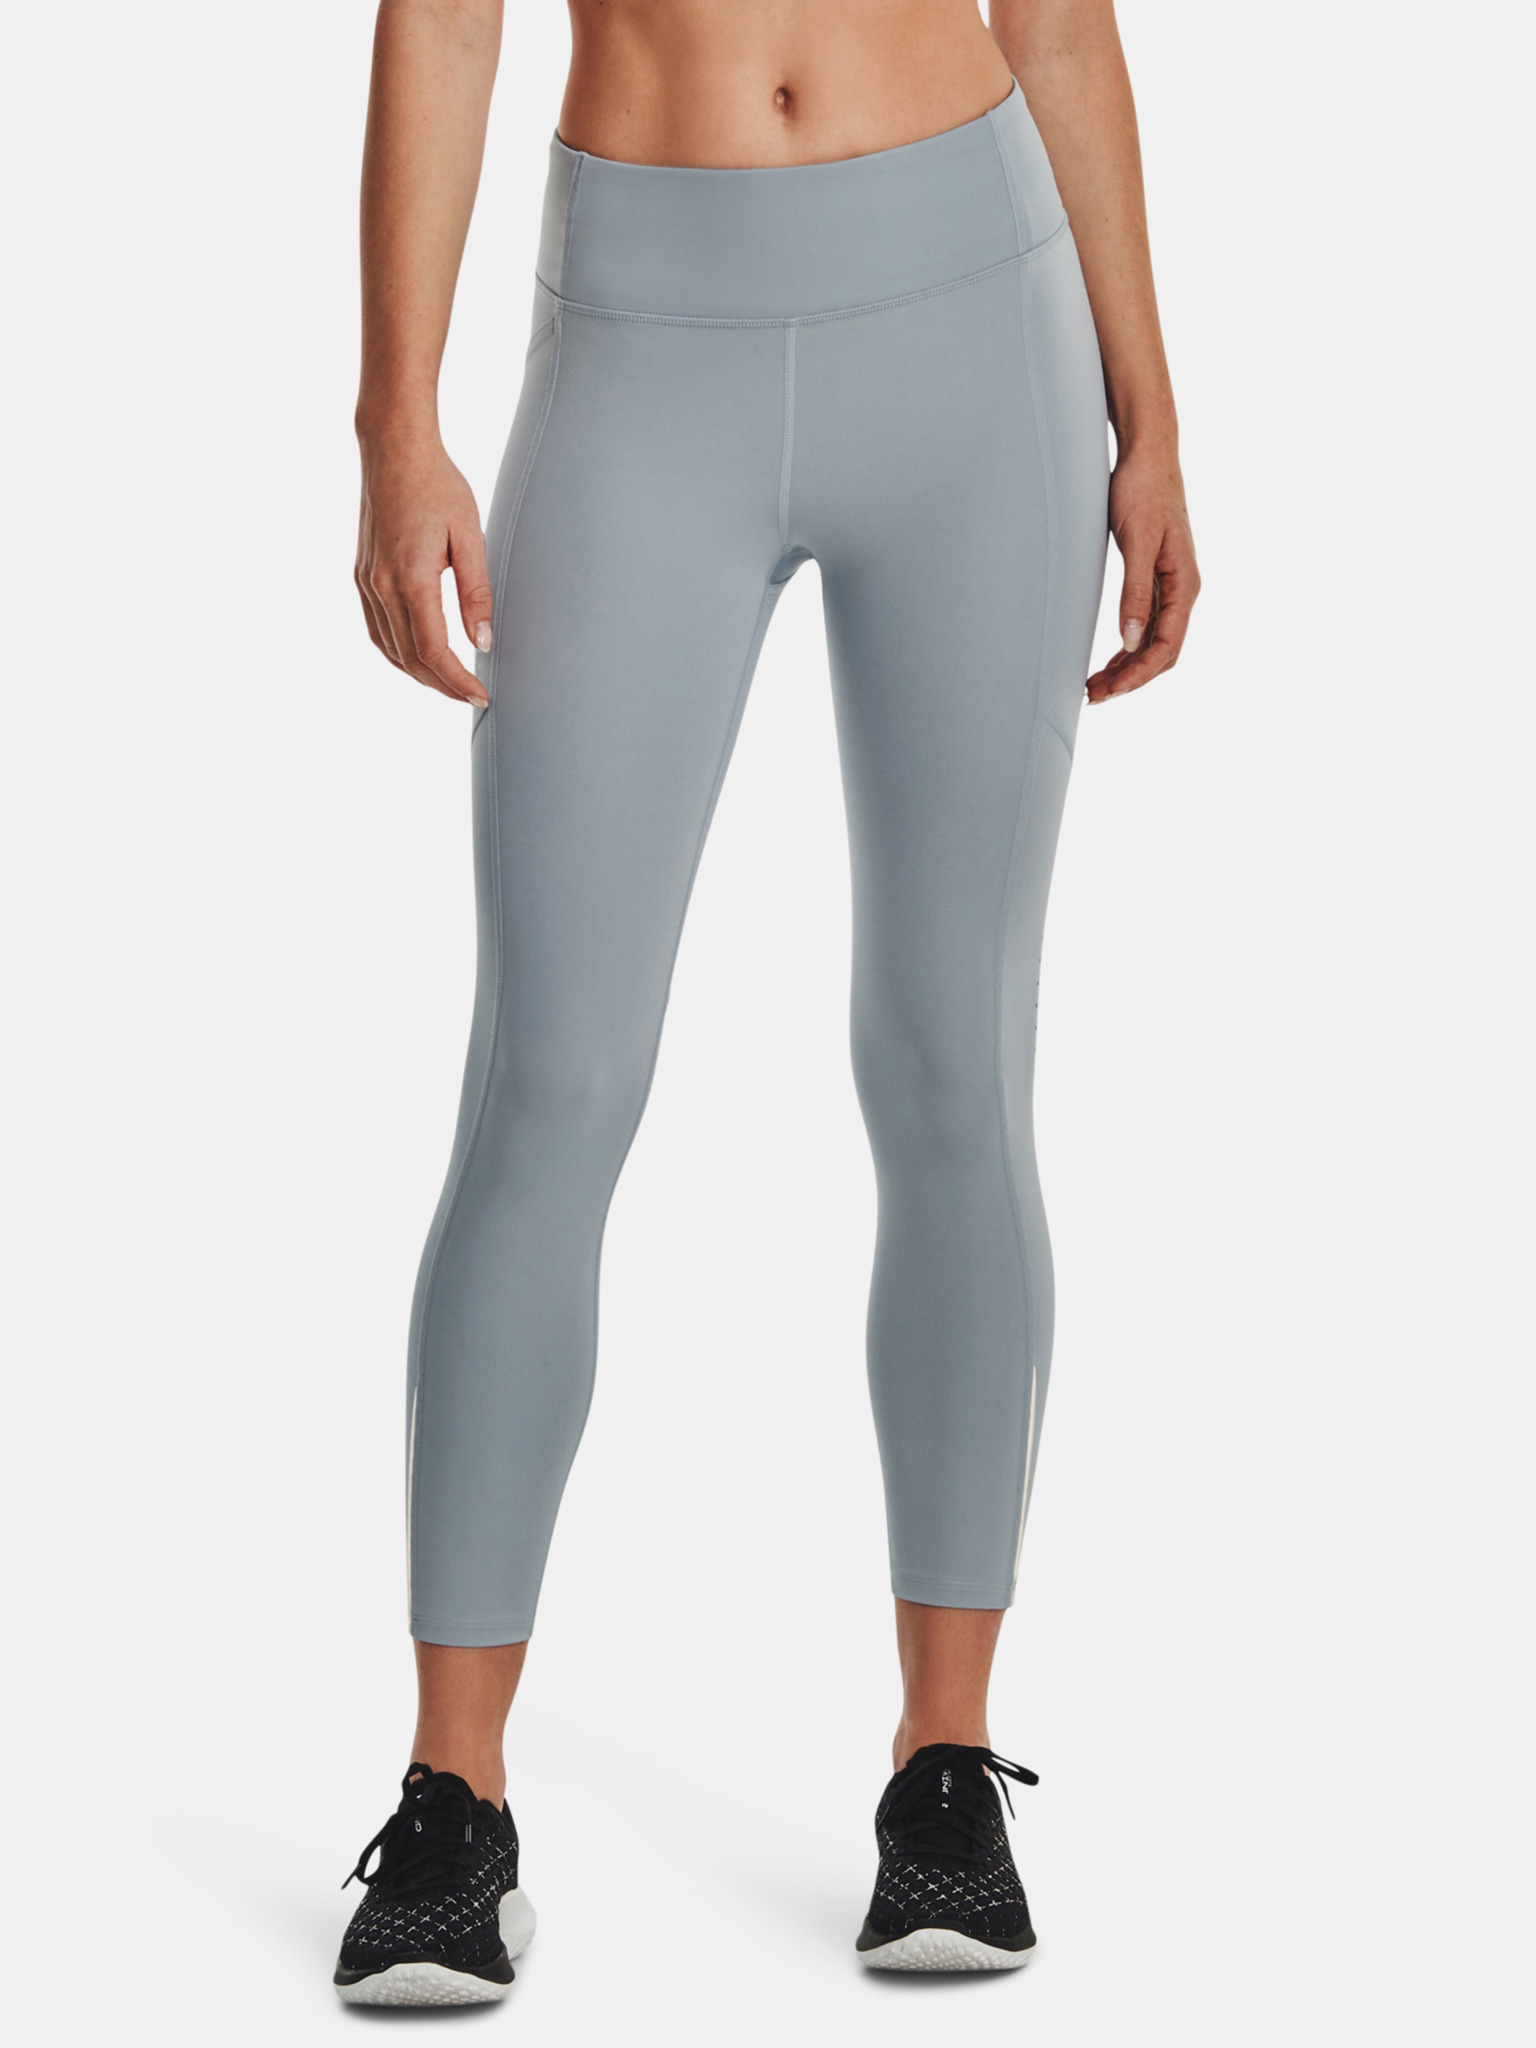 Grey Under Armour Womens HG No-Slip Waistband Ankle Leggings - Get